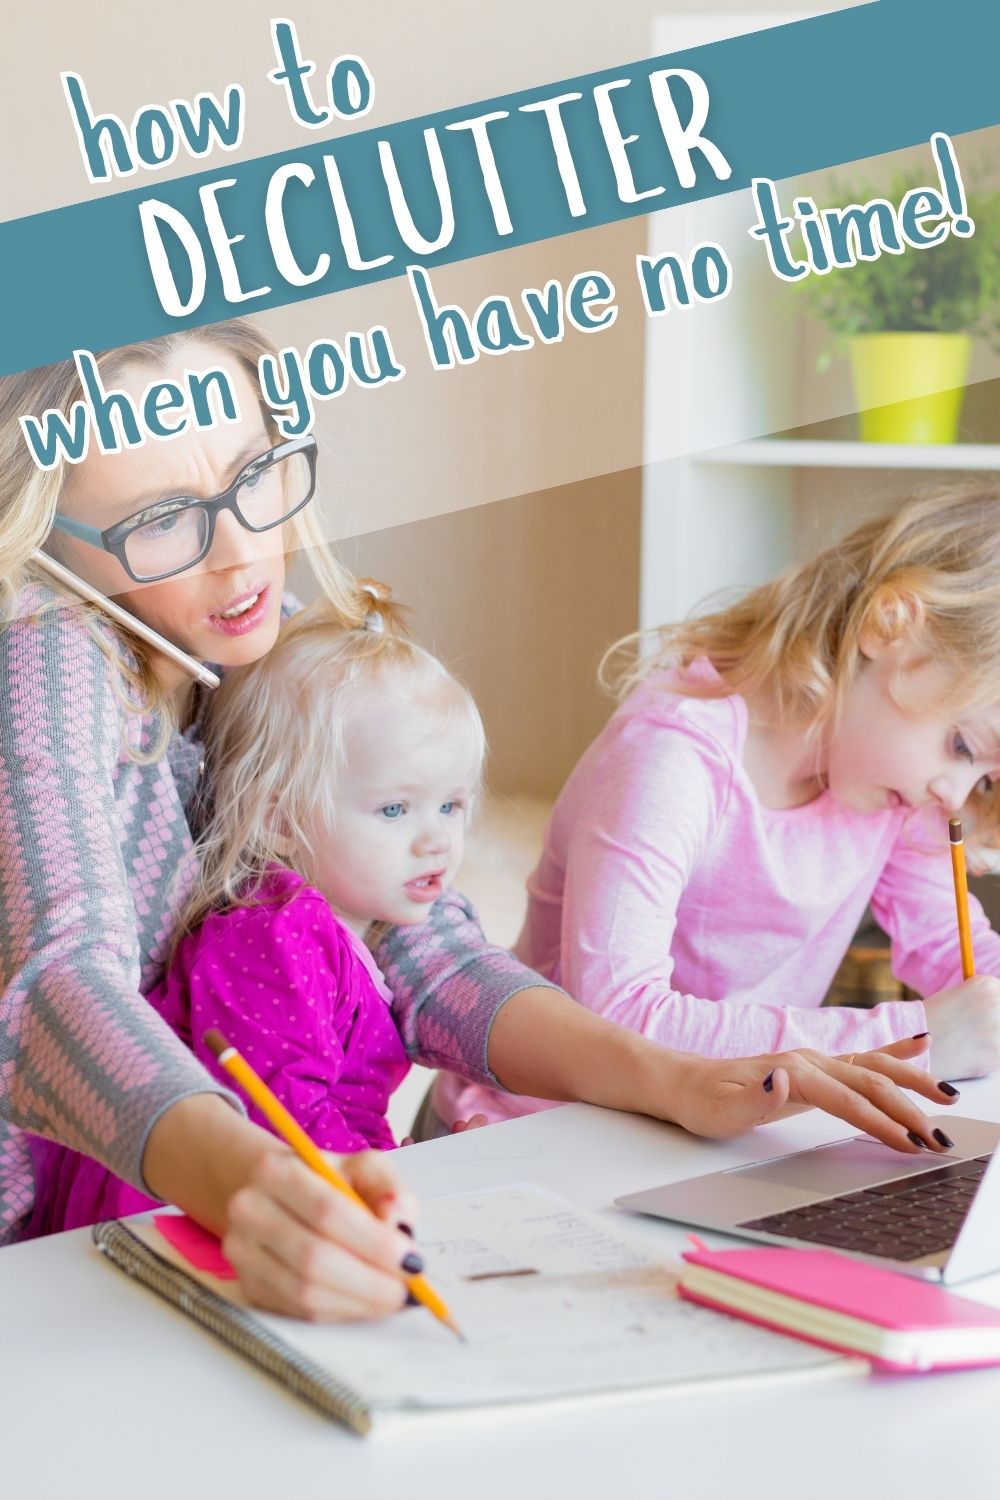 busy mom with two kids. pin reads "how to declutter when you have no time"